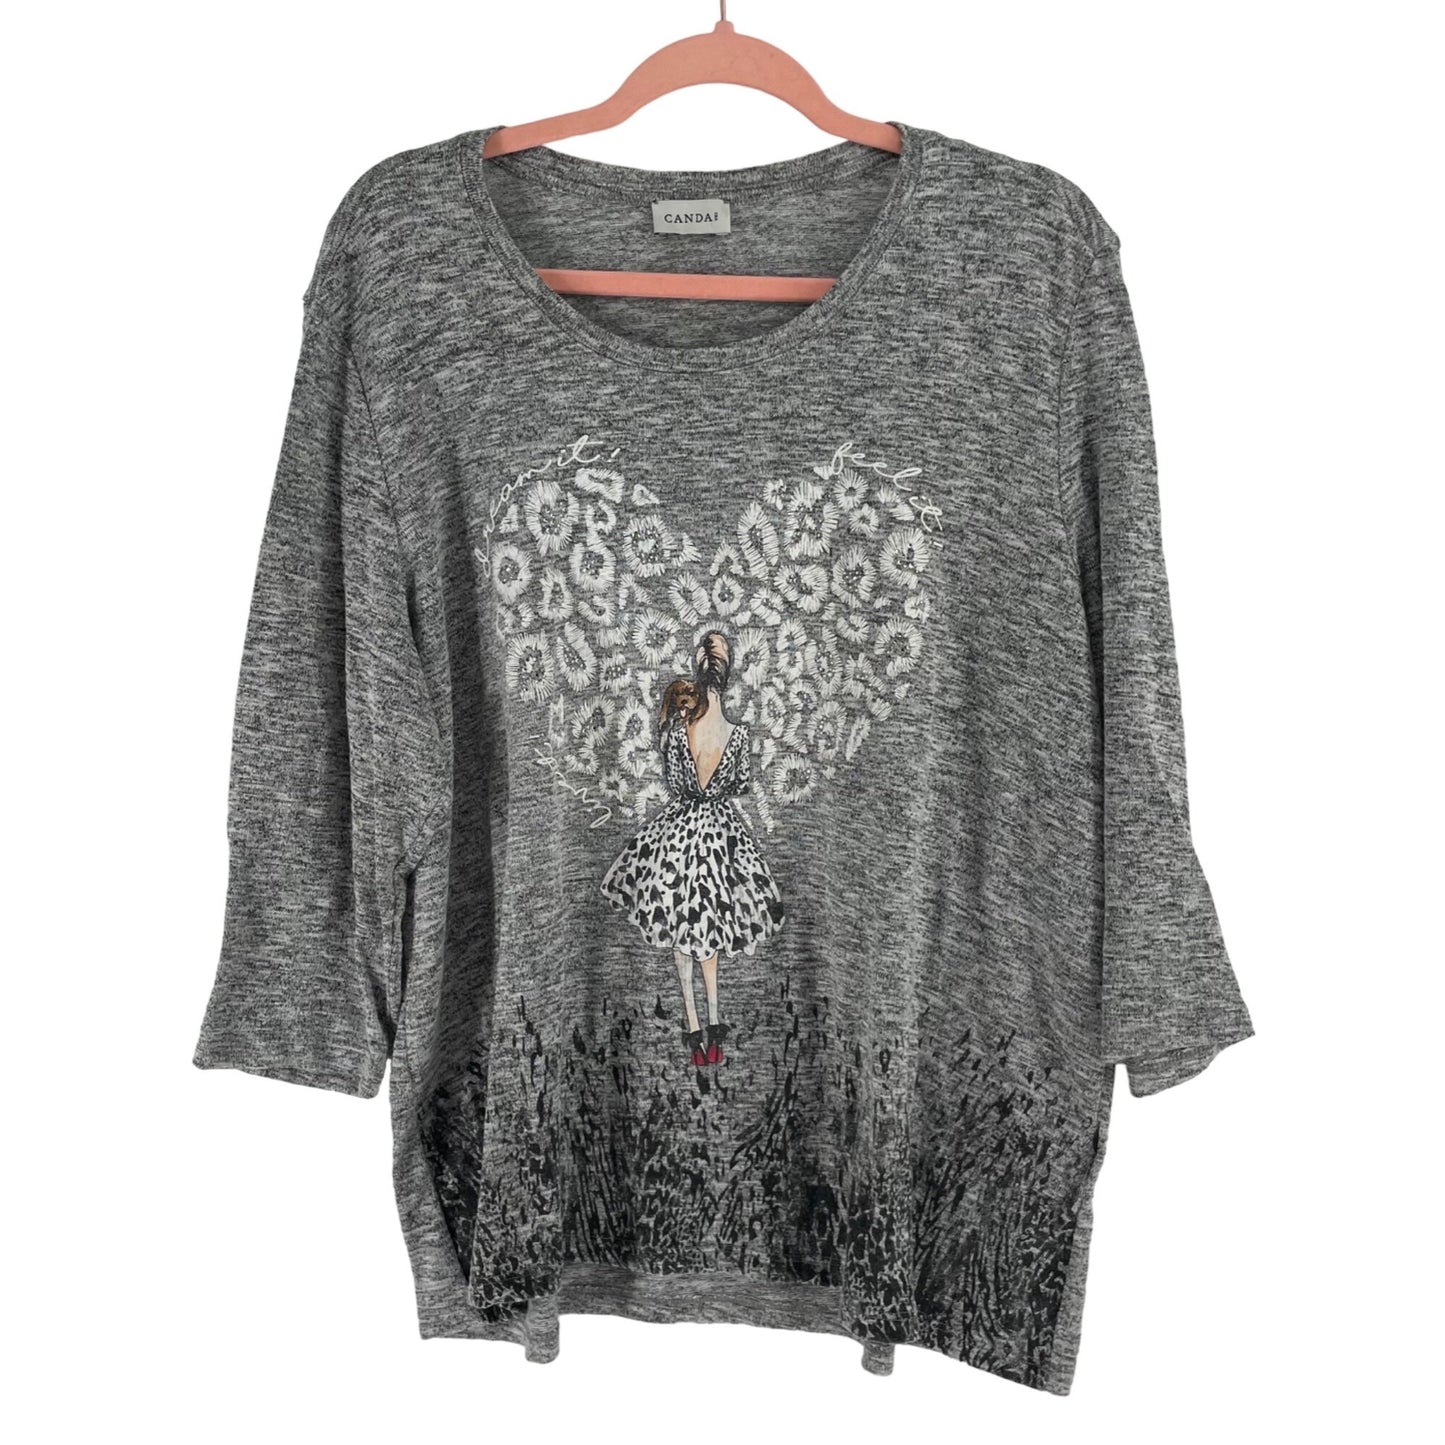 C & A Women’s Size Large Grey 3/4 Length Sleeve Top With Lady & Dog Graphic